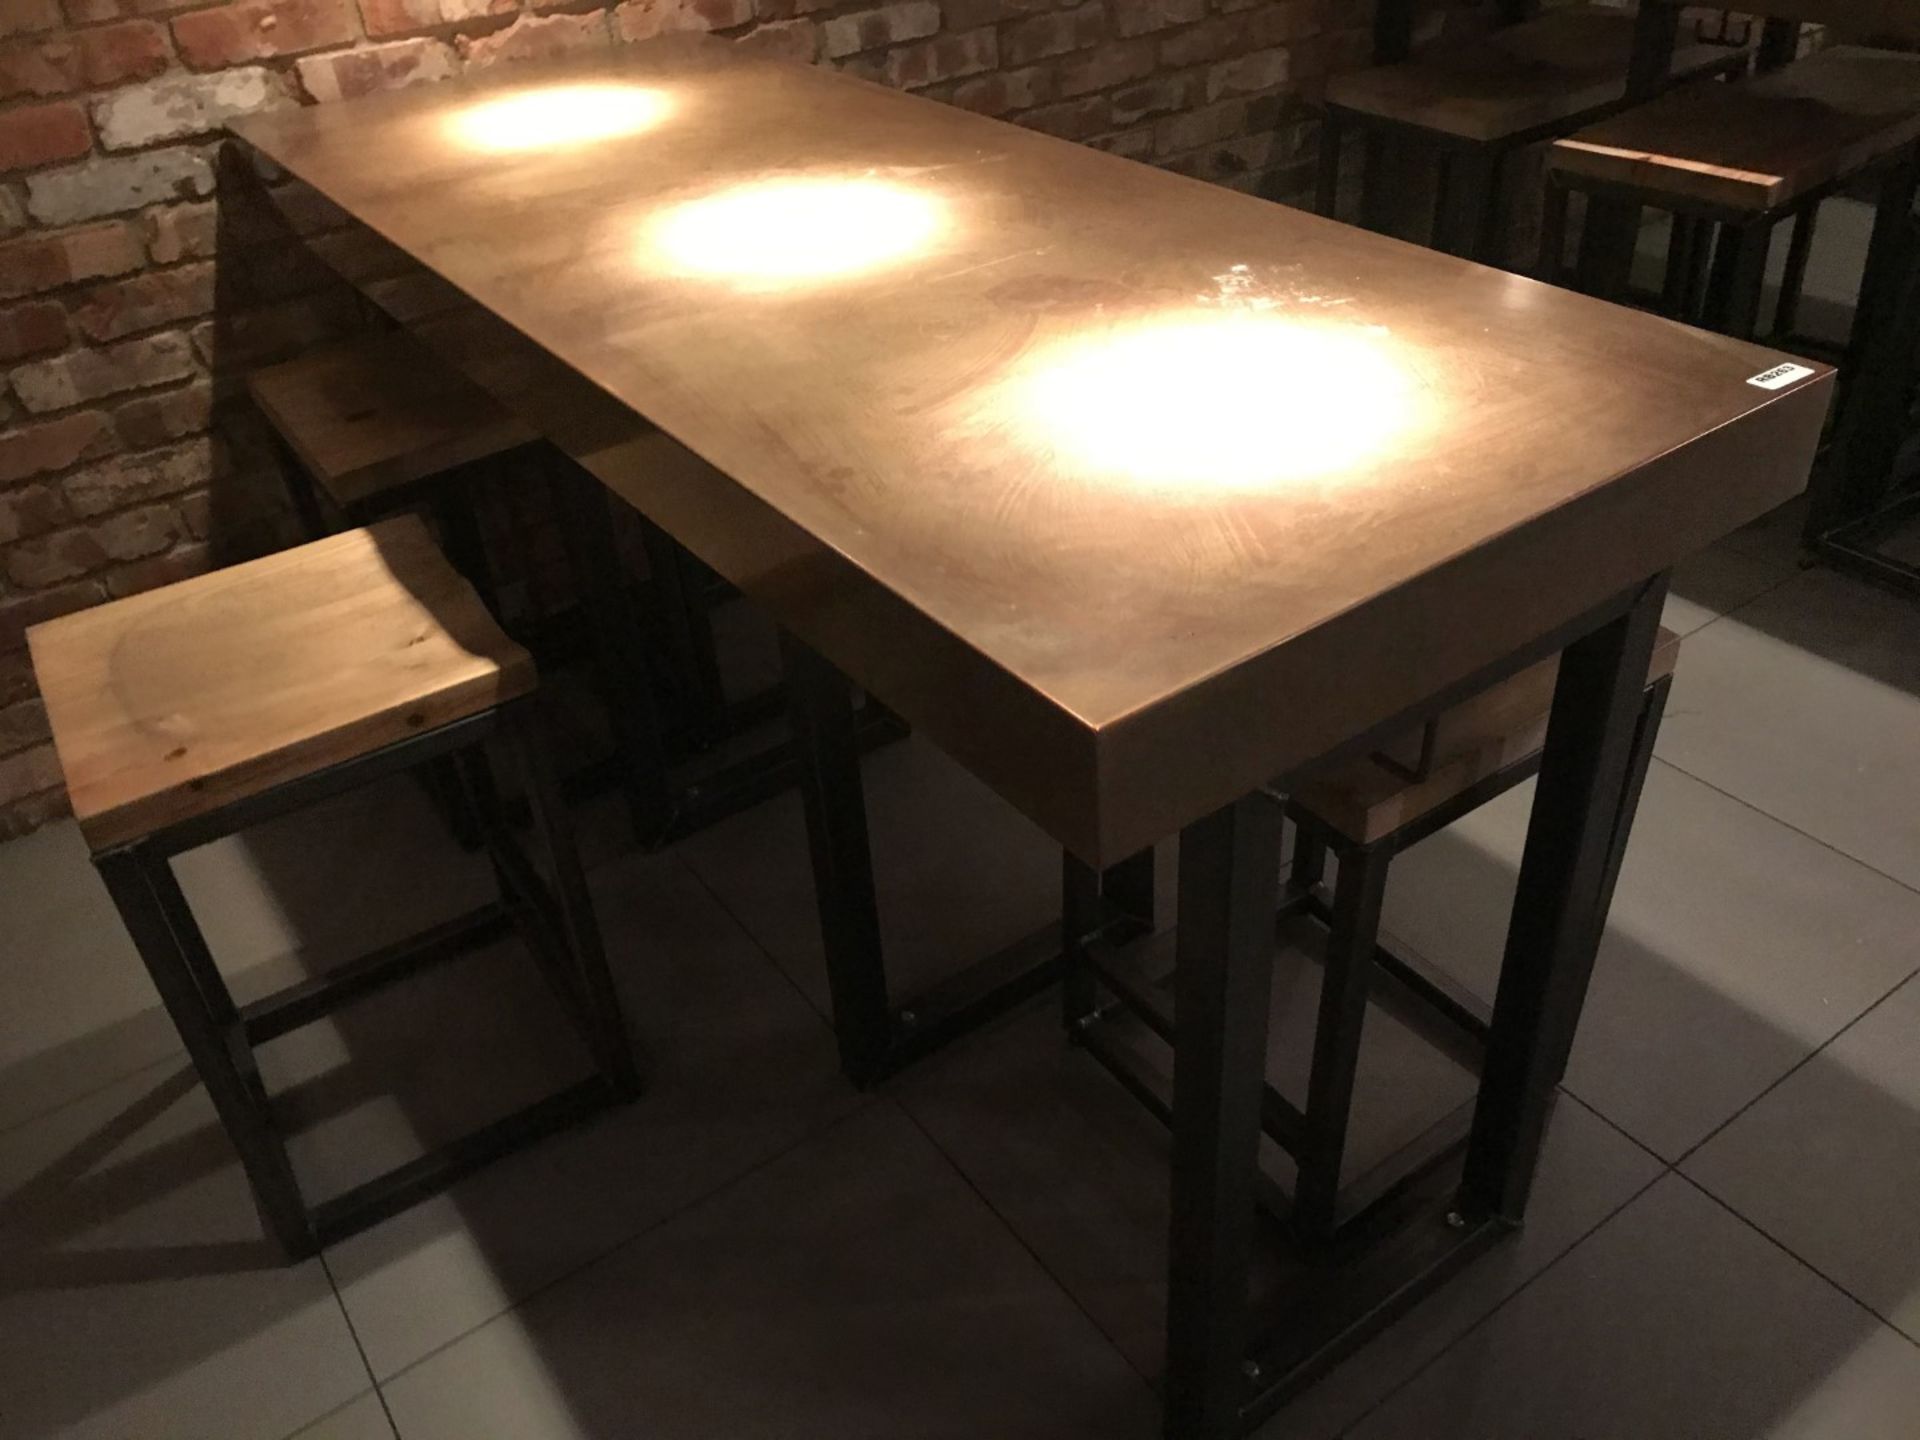 1 x Restaurant Dining Table With Industrial Metal Base and Copper Top - Size H91 x W180 x D70 - Image 4 of 6